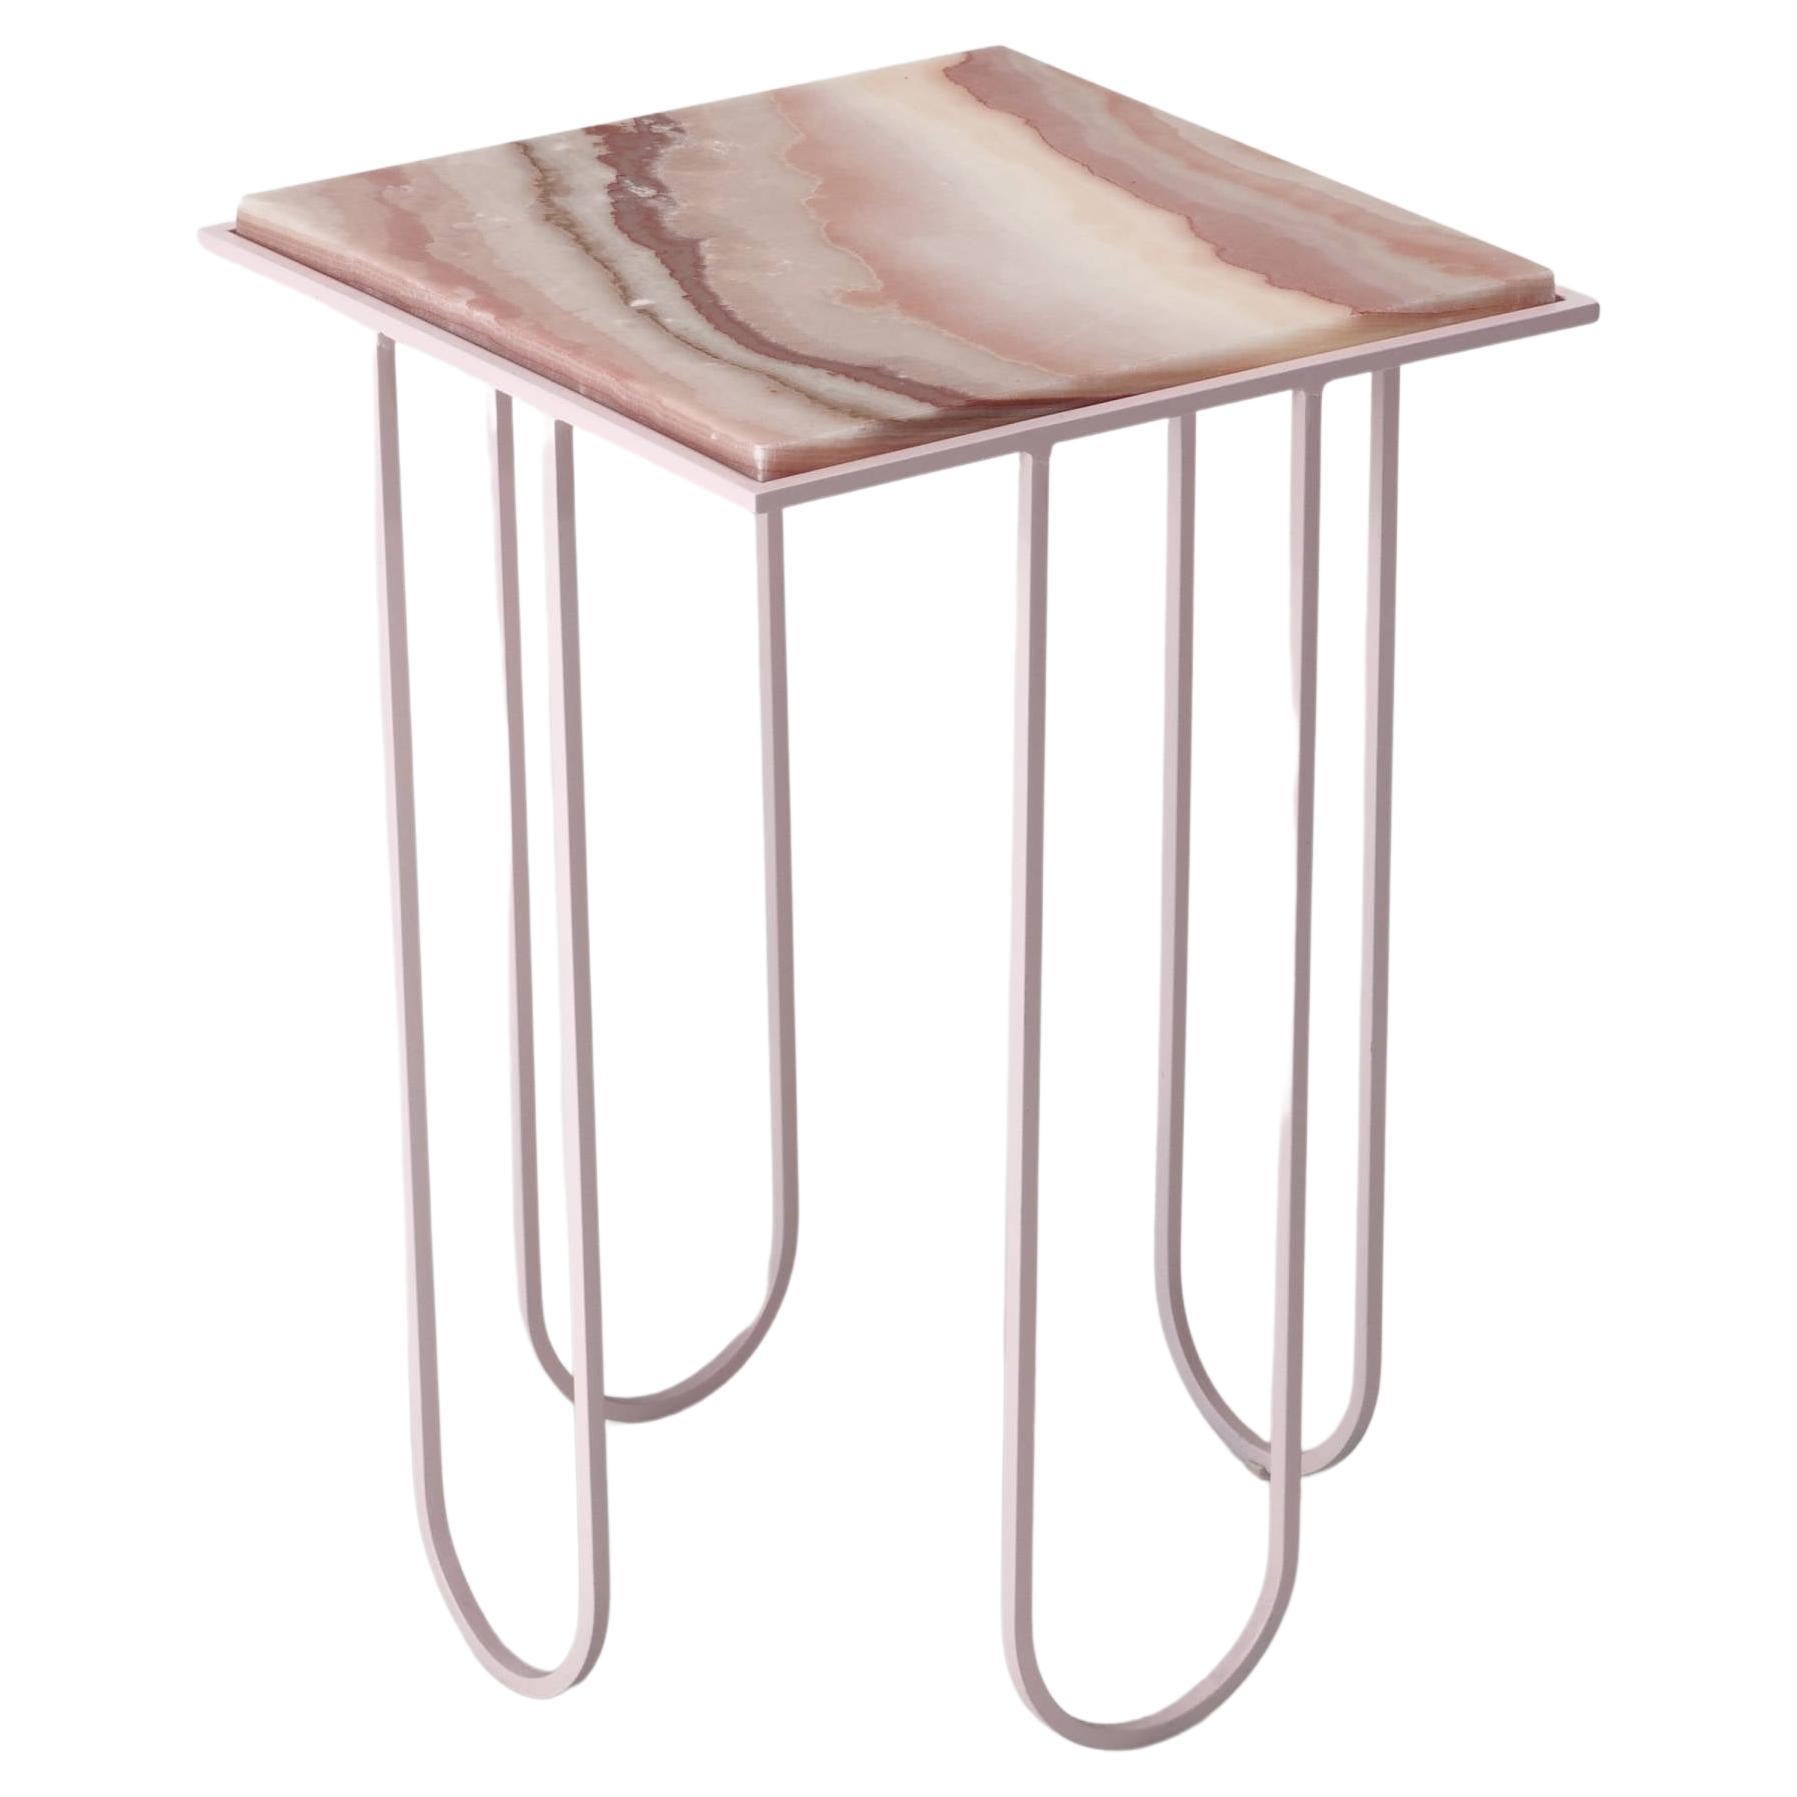 Lola - Pink Onyx Side Table by DFdesignlab Handmade in Italy  For Sale